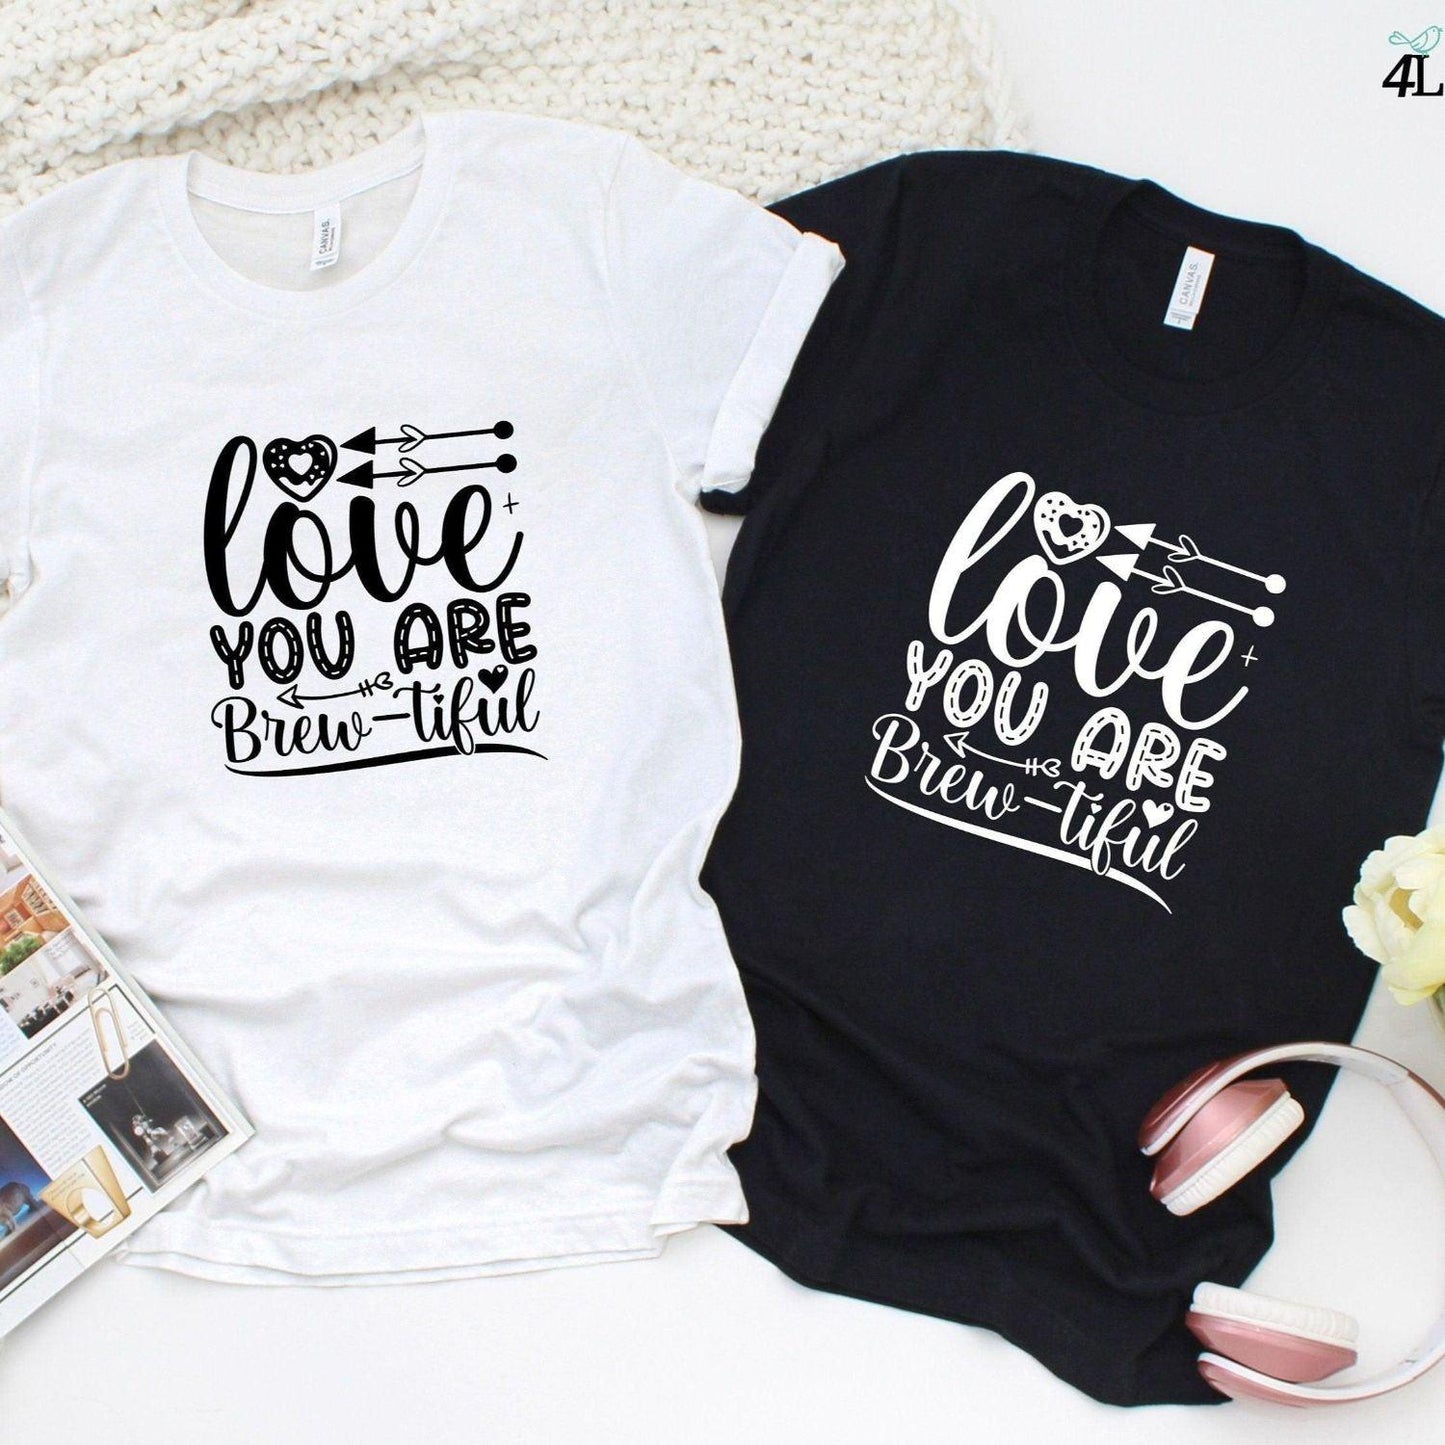 Matching Set: Love You Are Brew-tiful - Perfect Couple Gift for Valentine's Day! - 4Lovebirds